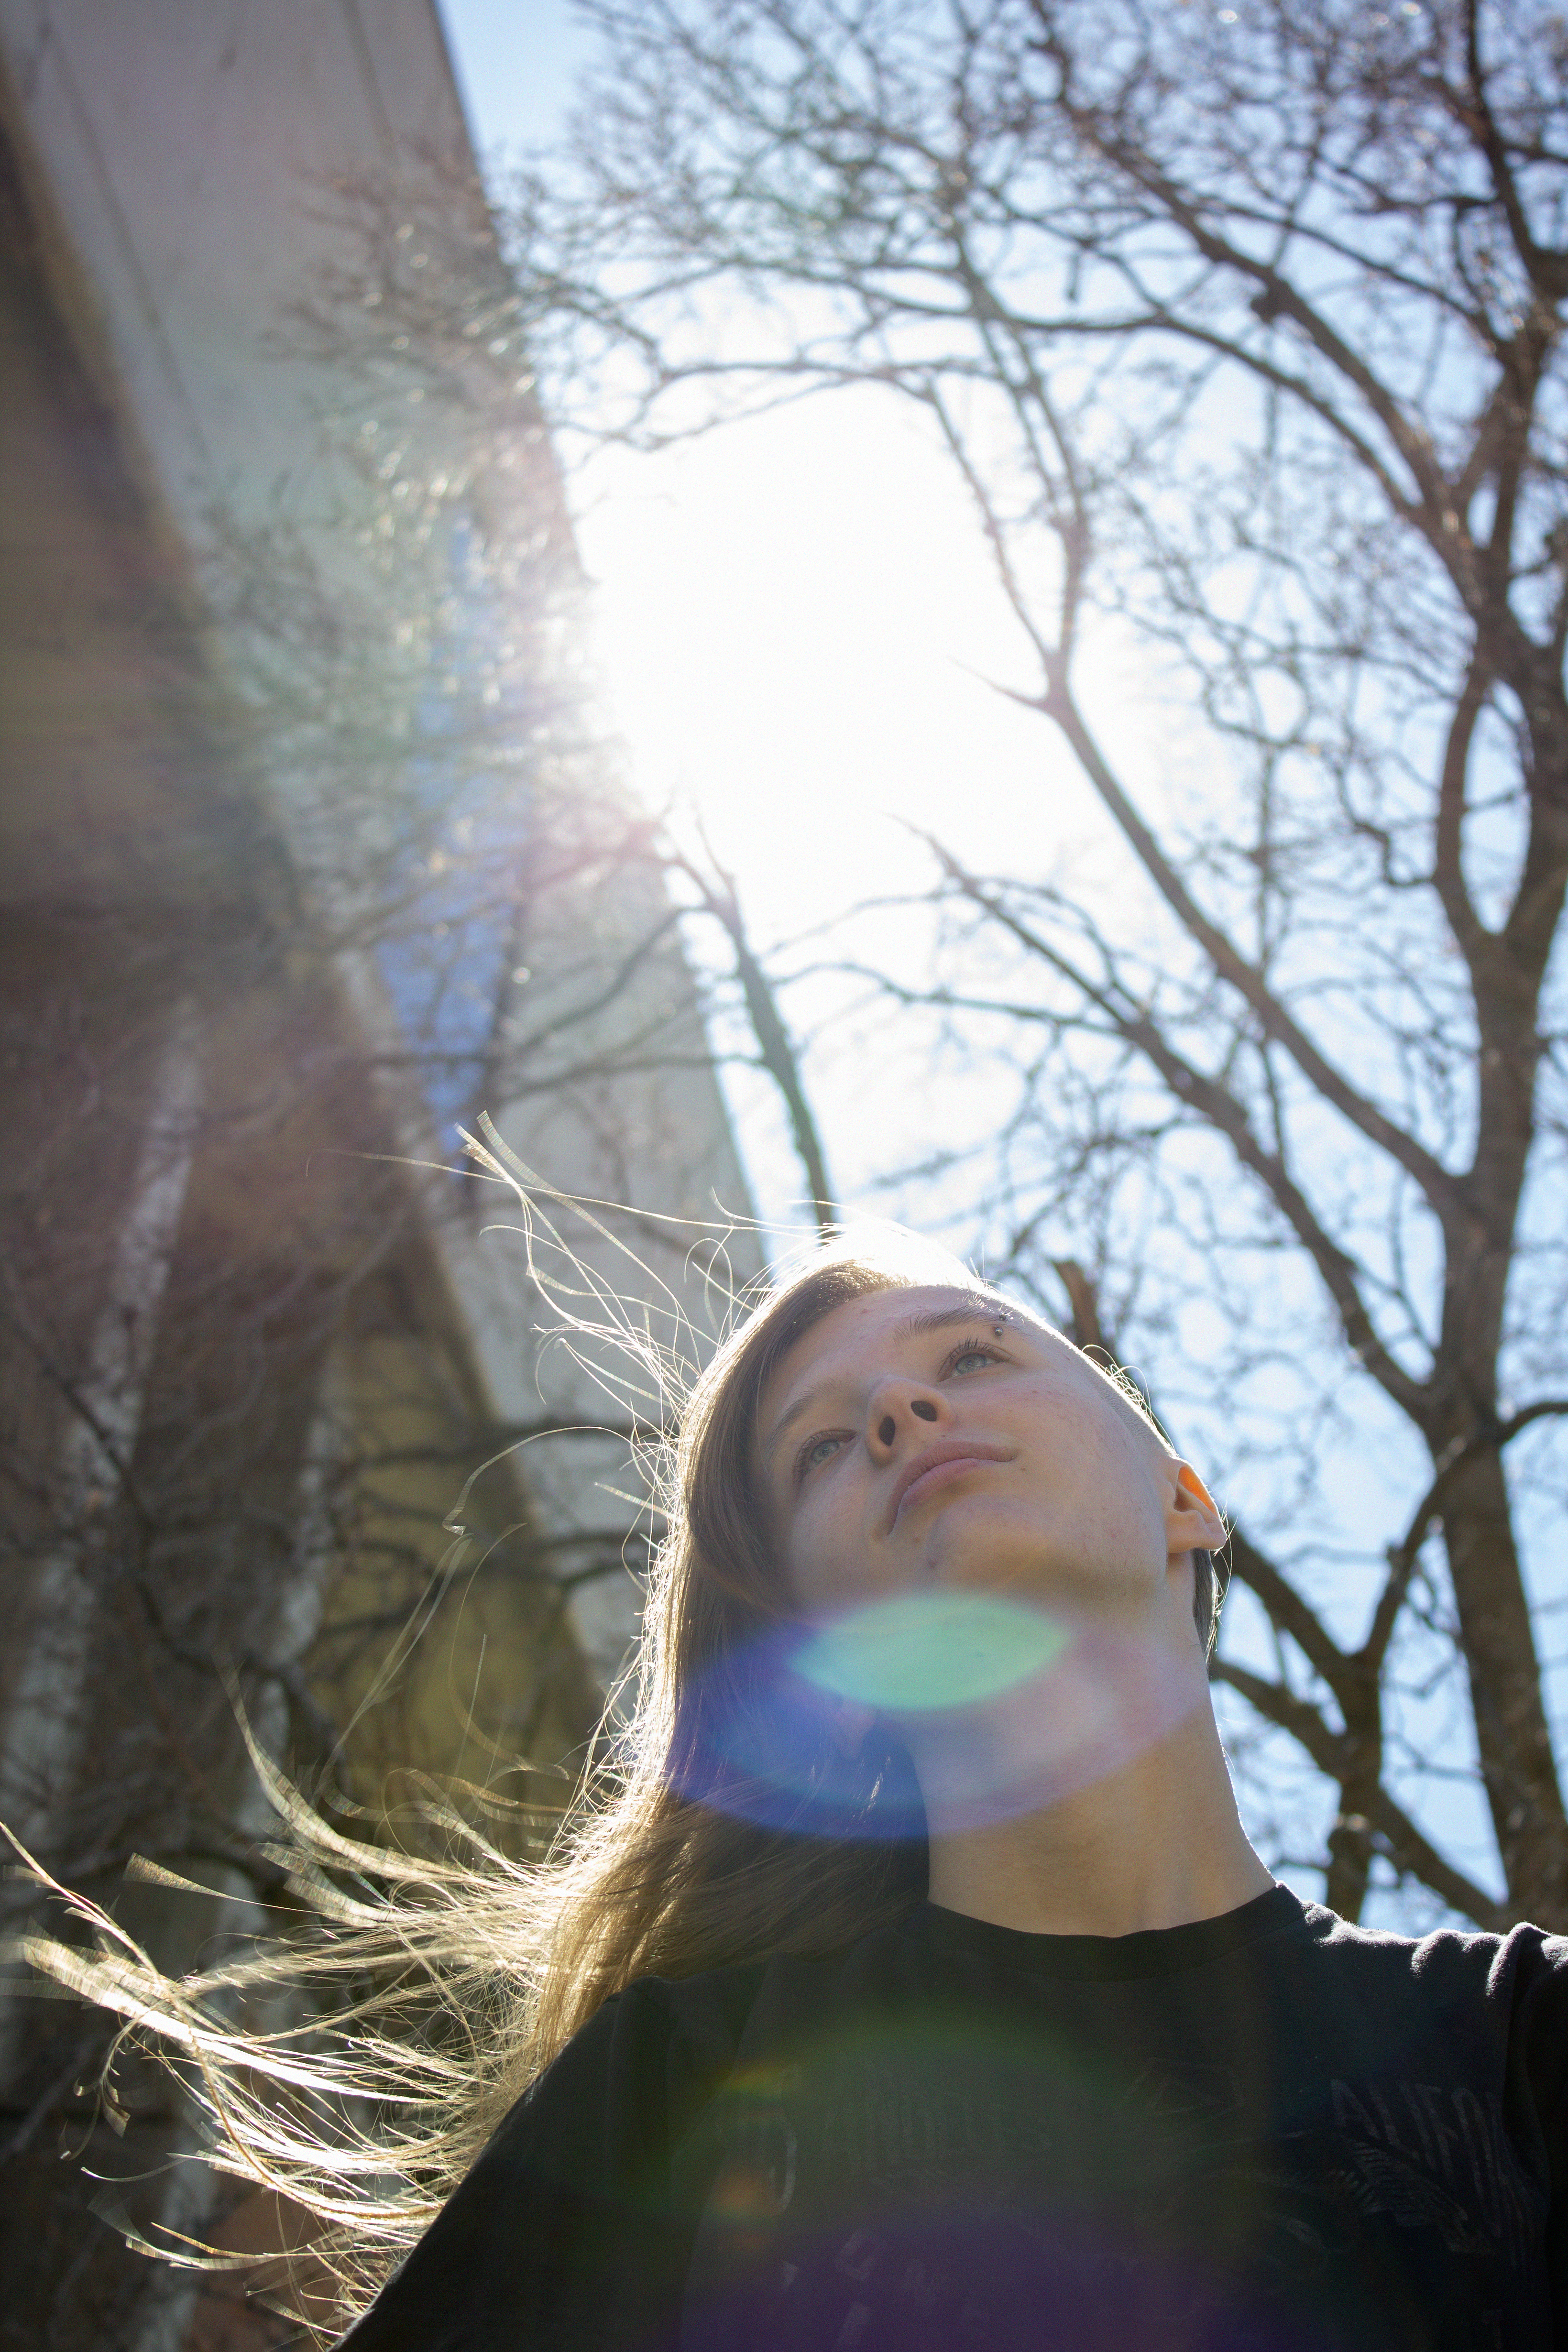 a portrait of a young woman, flipping her long hair in the sunlight outside.